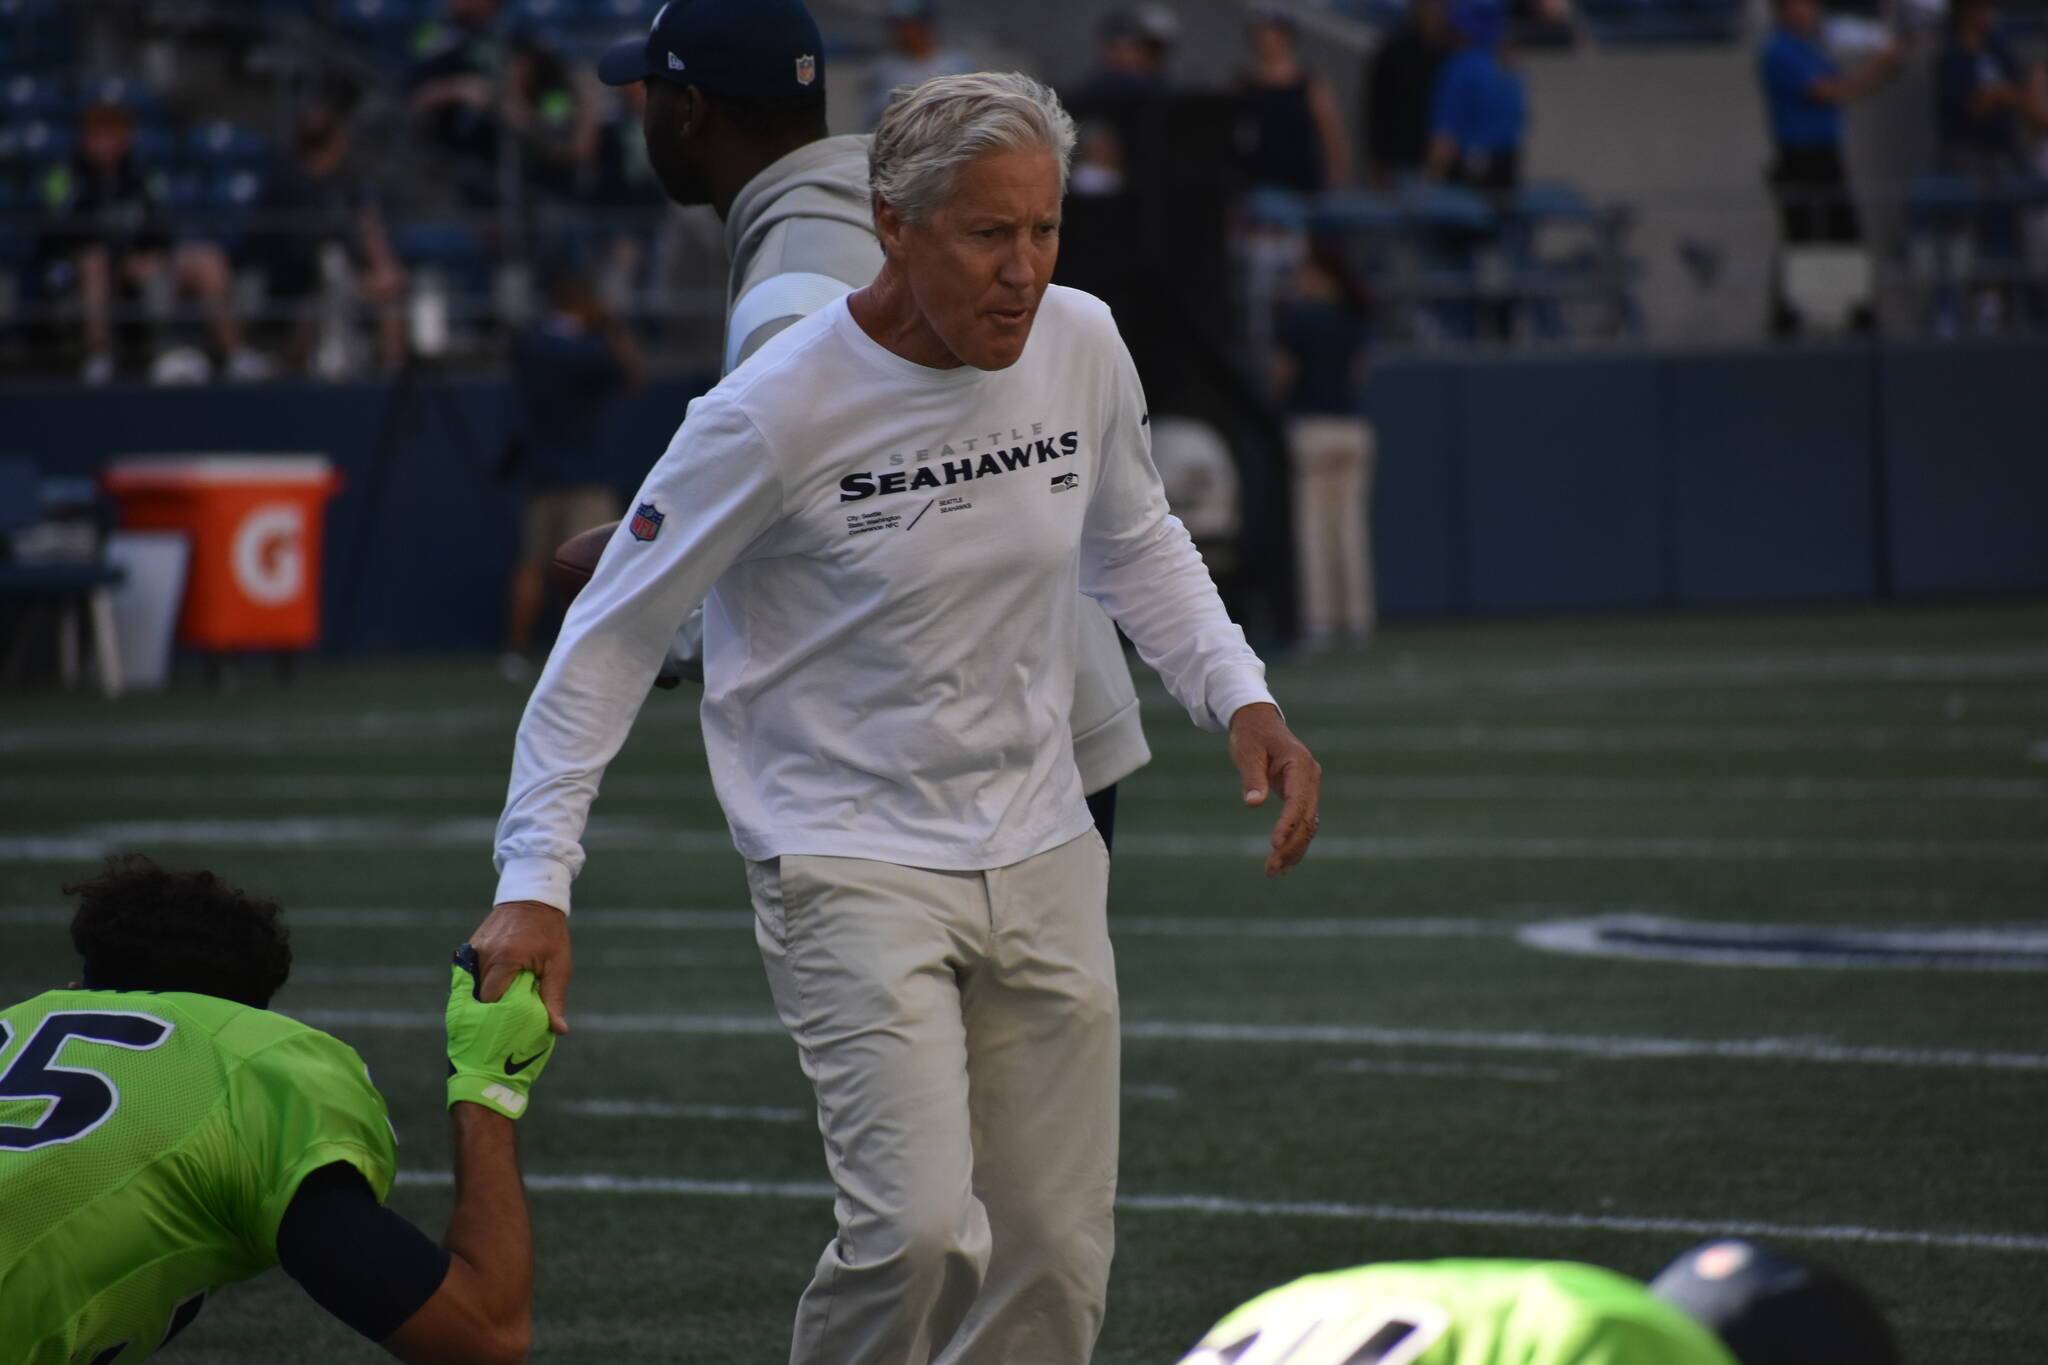 Seahawks Coach Pete Carroll going for a high-five with the defense. (Photos by Ben Ray / Sound Publishing)